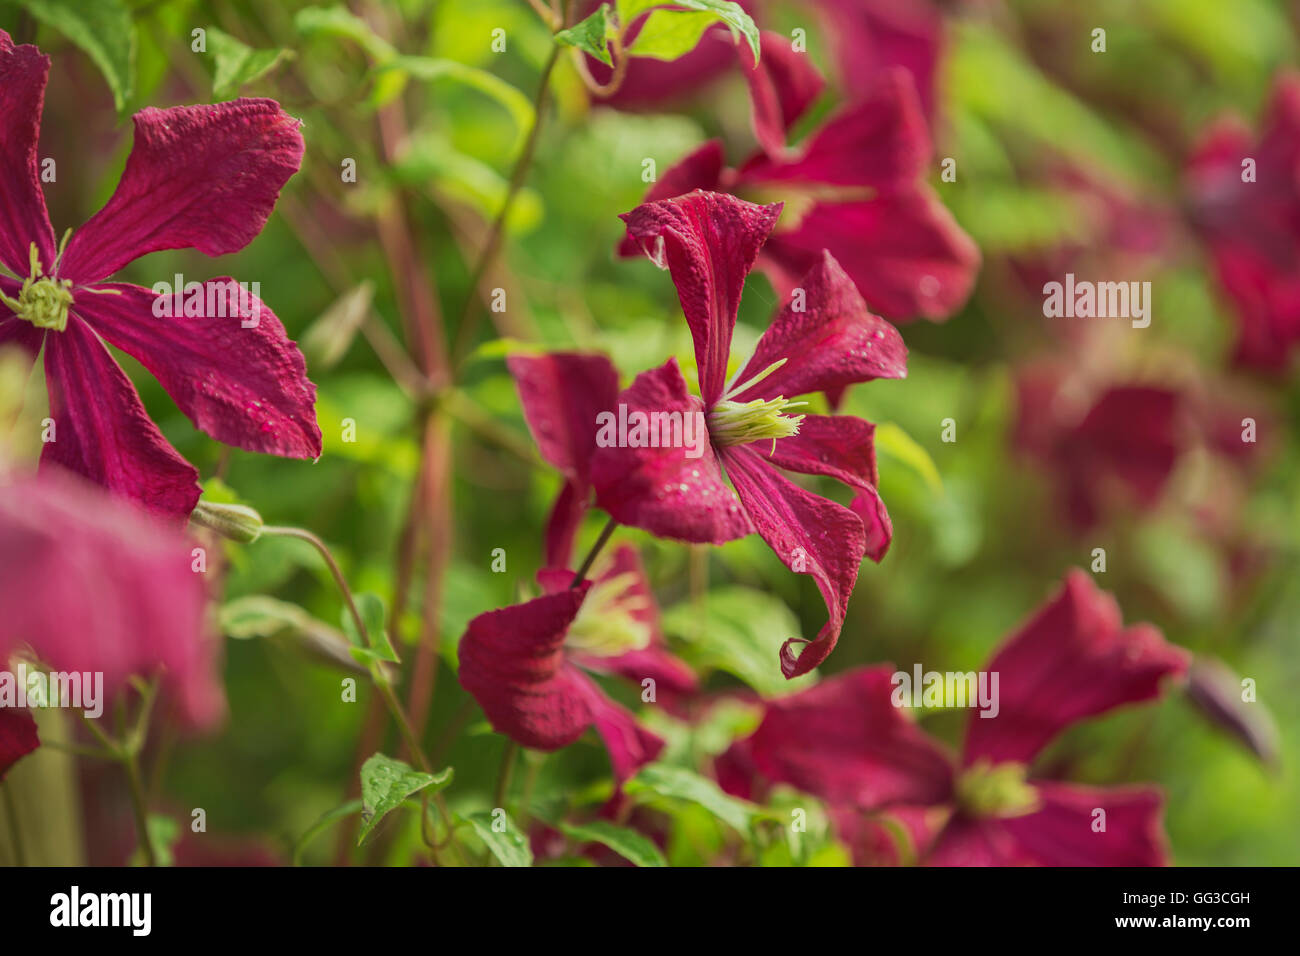 Burgundy coloured Clematis. Stock Photo